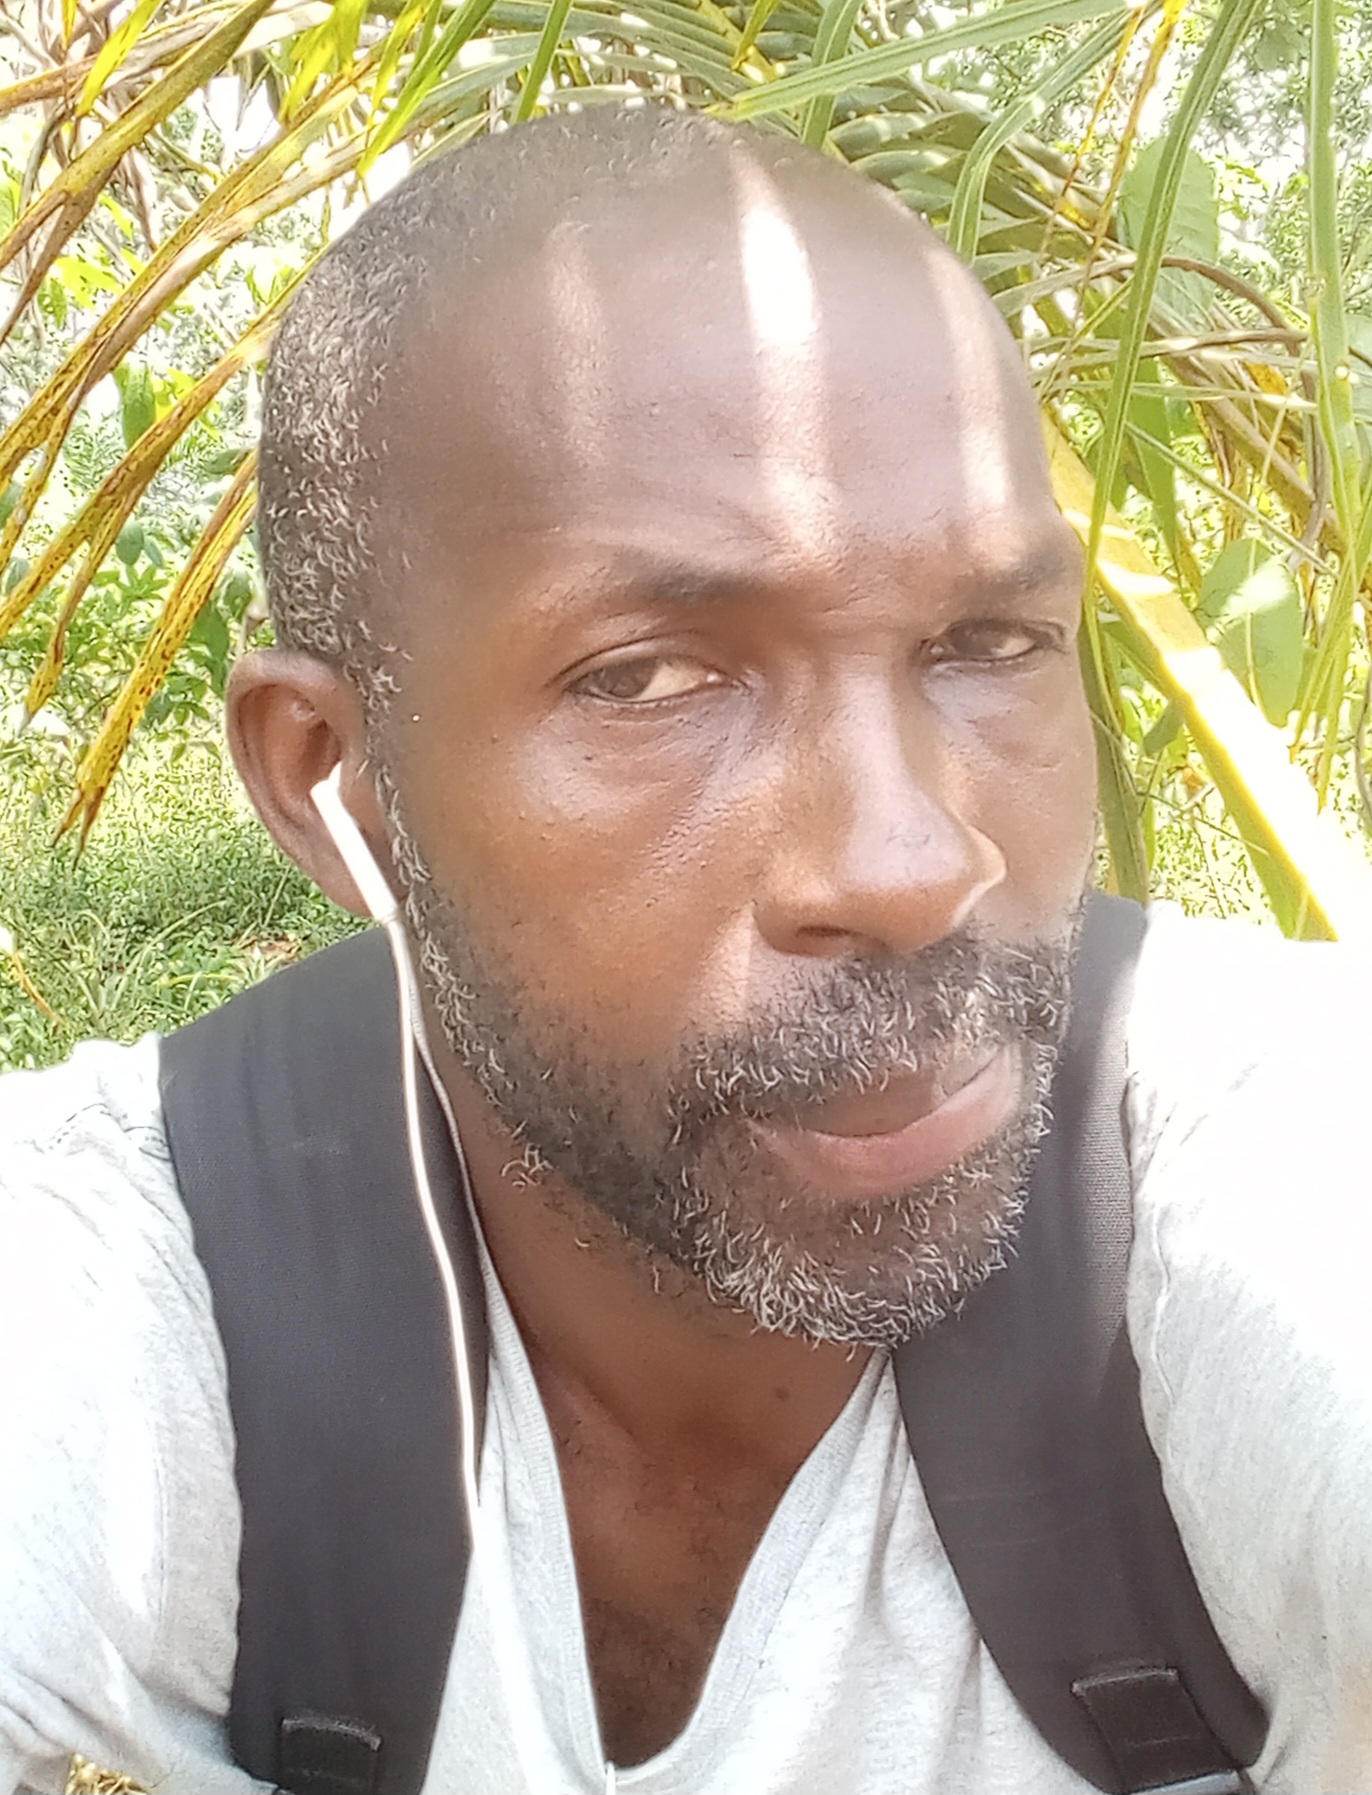 Profile picture of the artist Atouloo